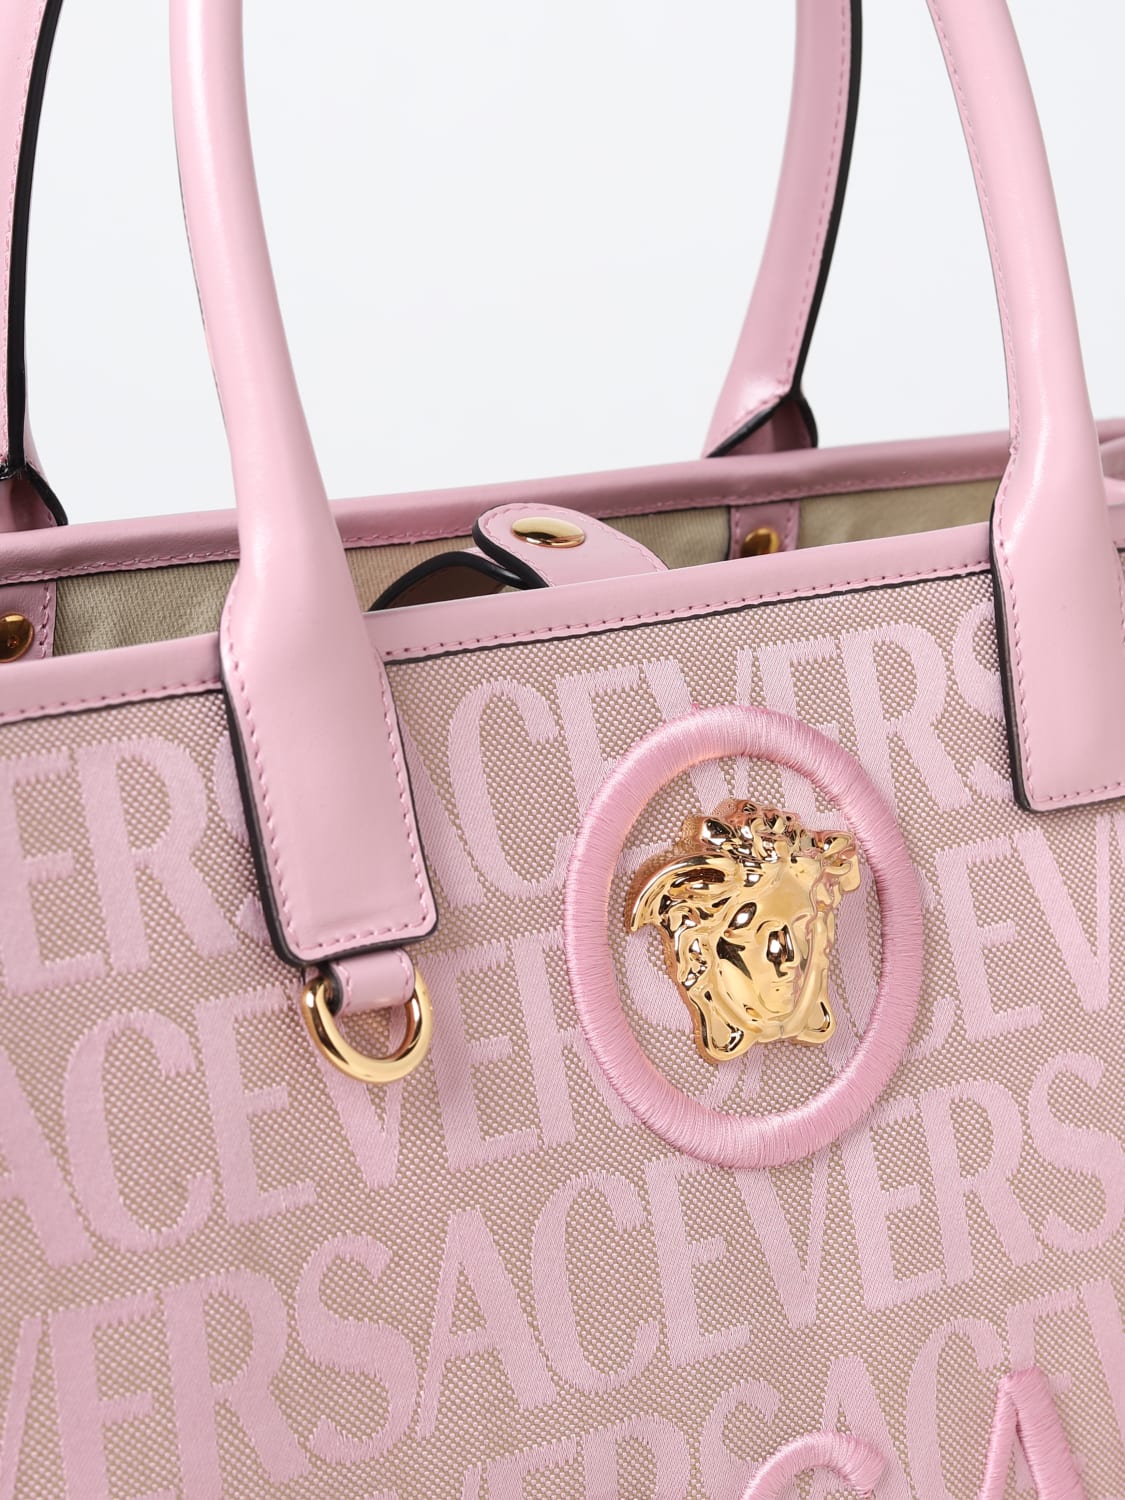 VERSACE: Allover ag in jacquard canvas - Pink  Versace tote bags  10047411A08199 online at